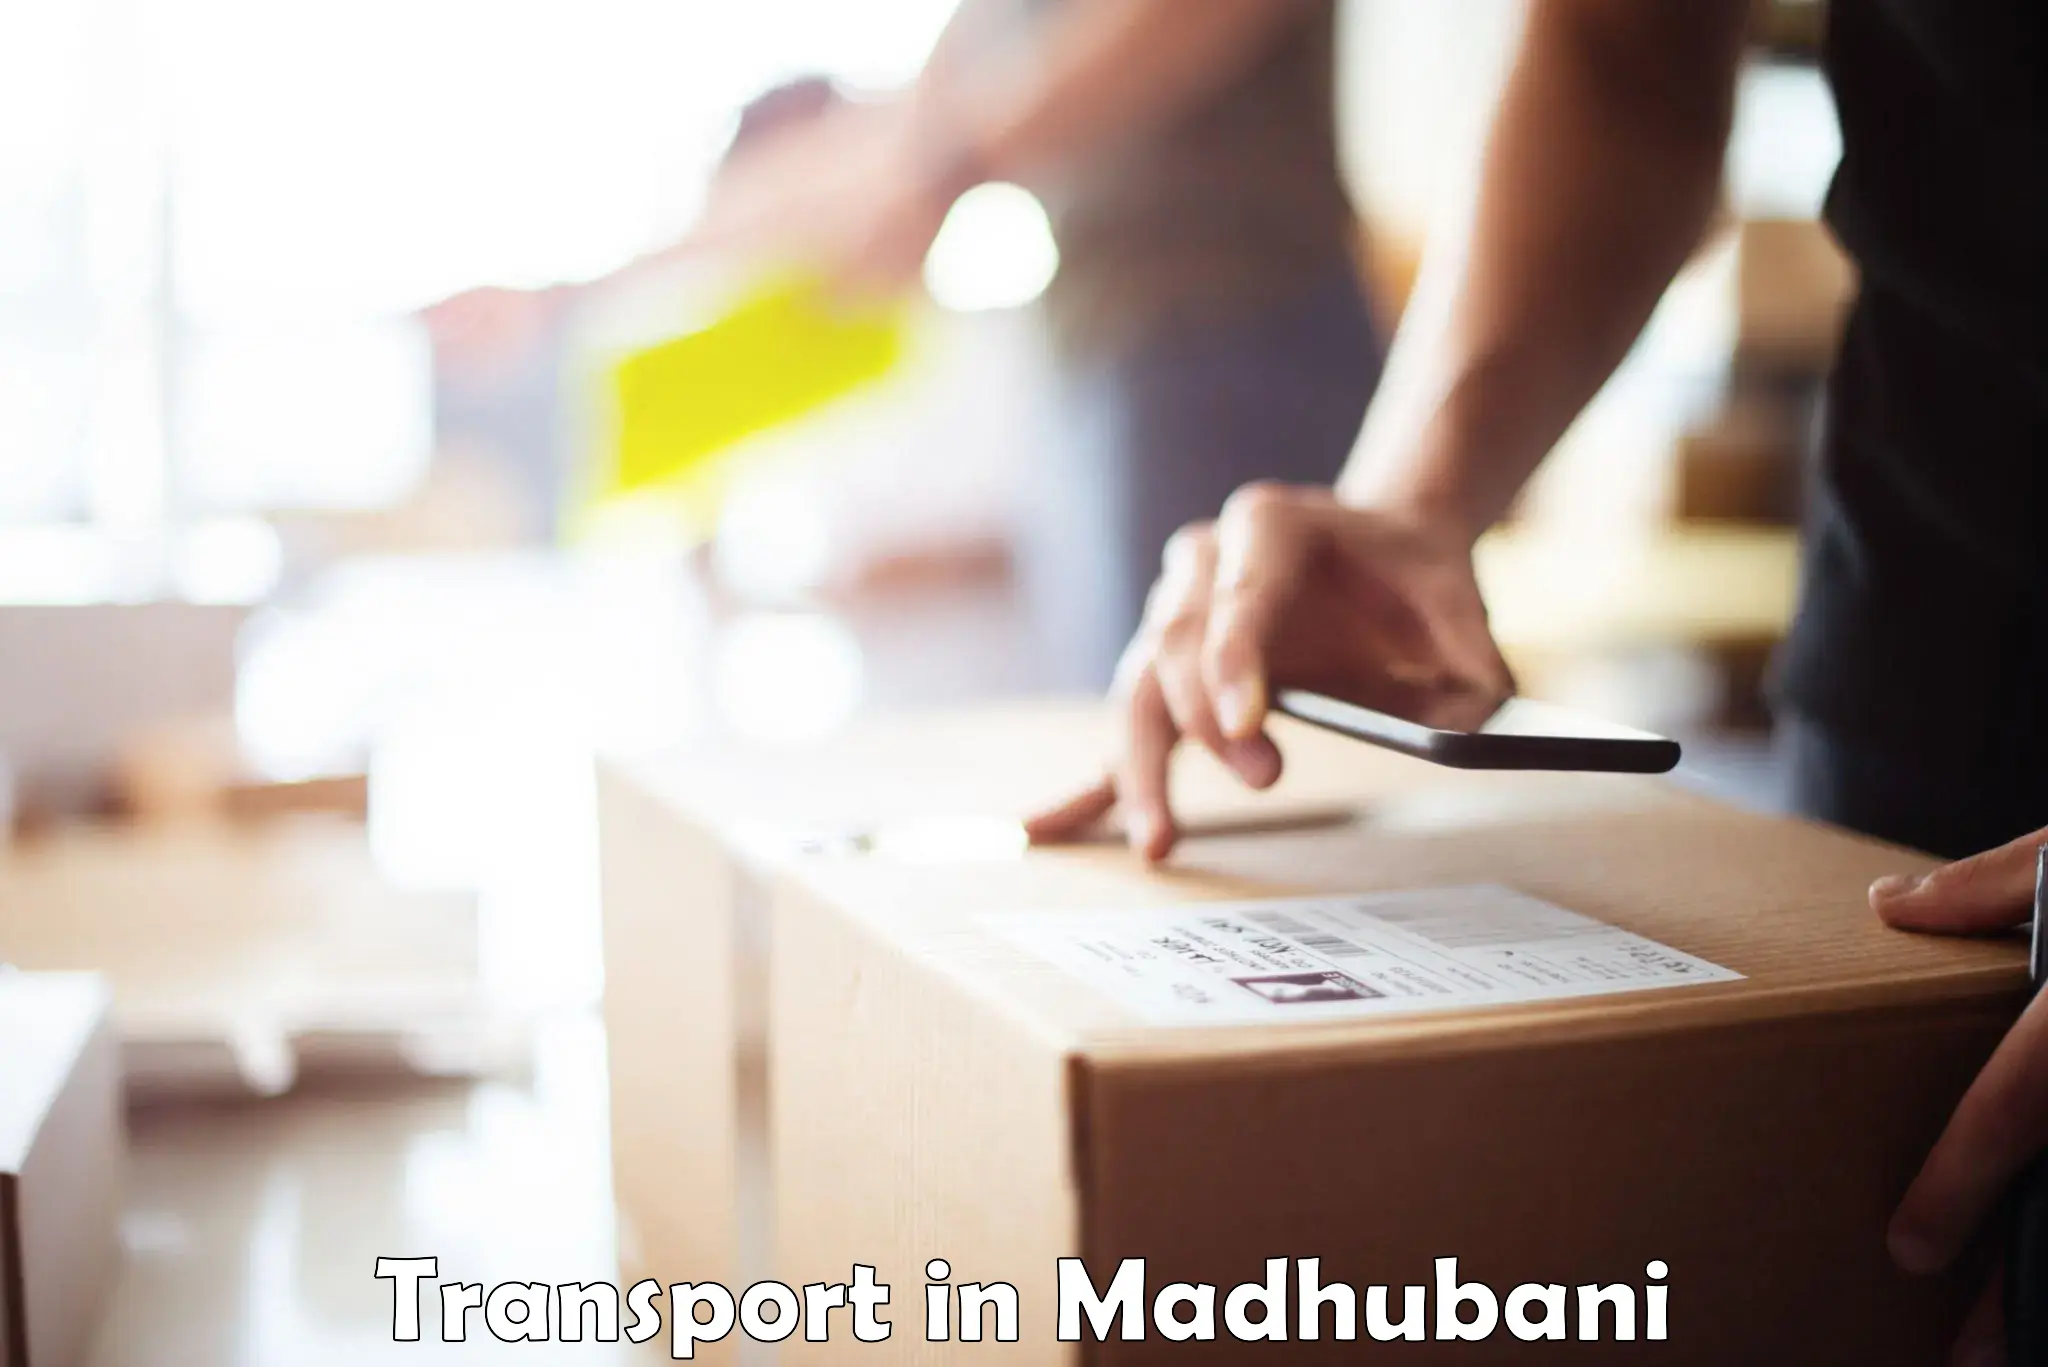 Road transport online services in Madhubani